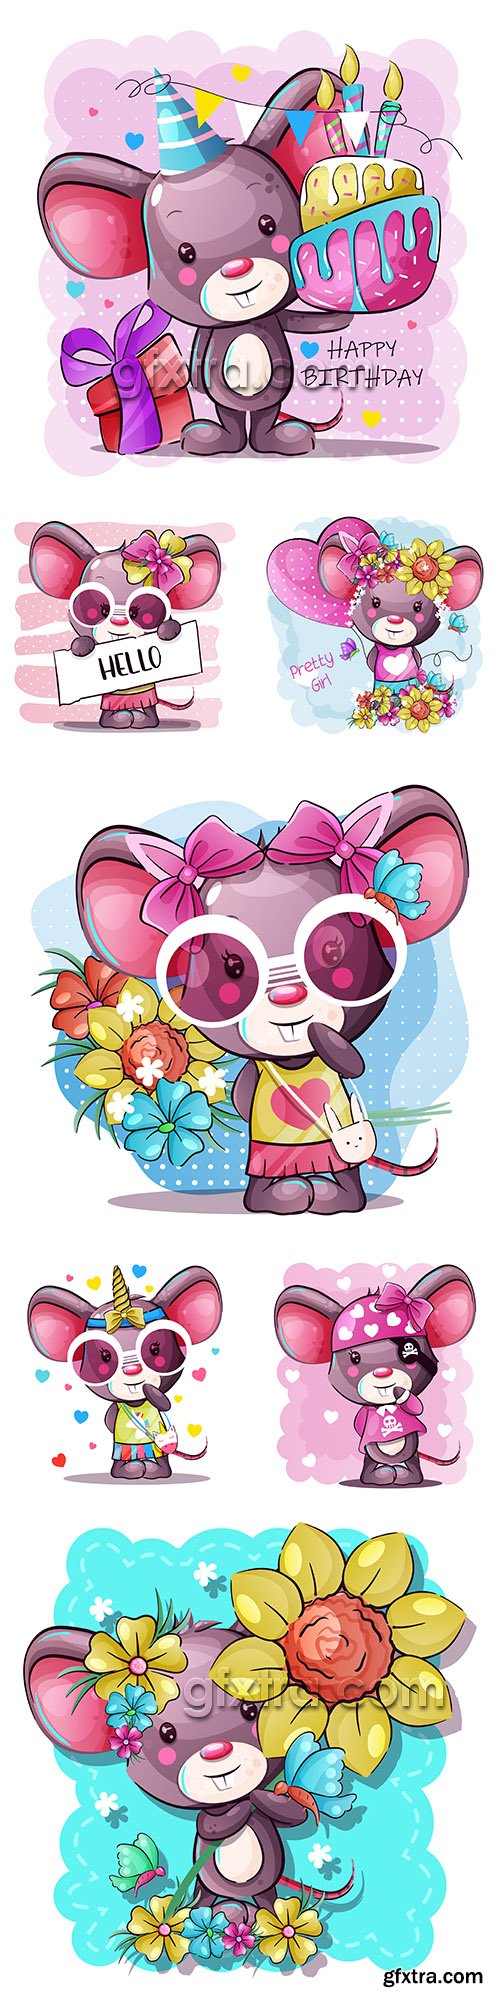 Nice cartoon mouse with colors bright illustrations